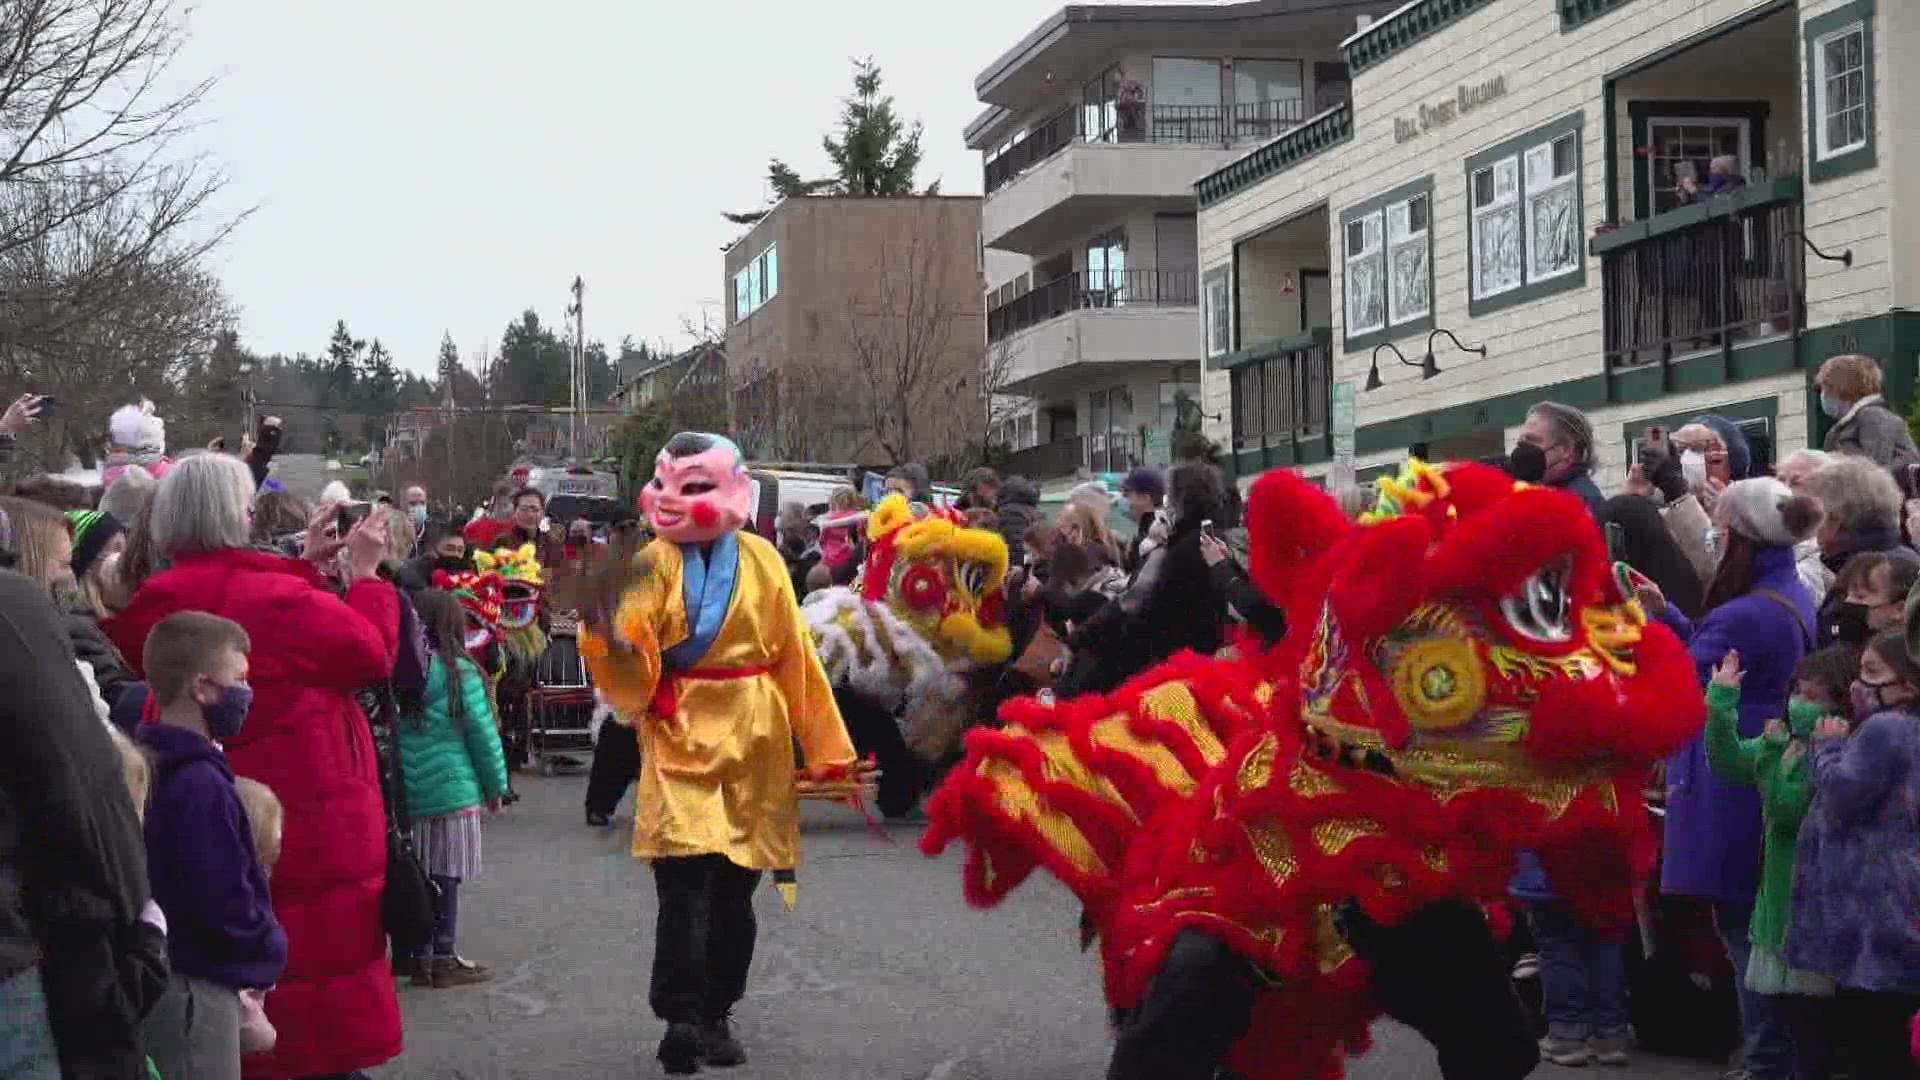 The city of Edmonds rings in the Year of the Rabbit this weekend with its Second Annul Lunar New Year Celebration.